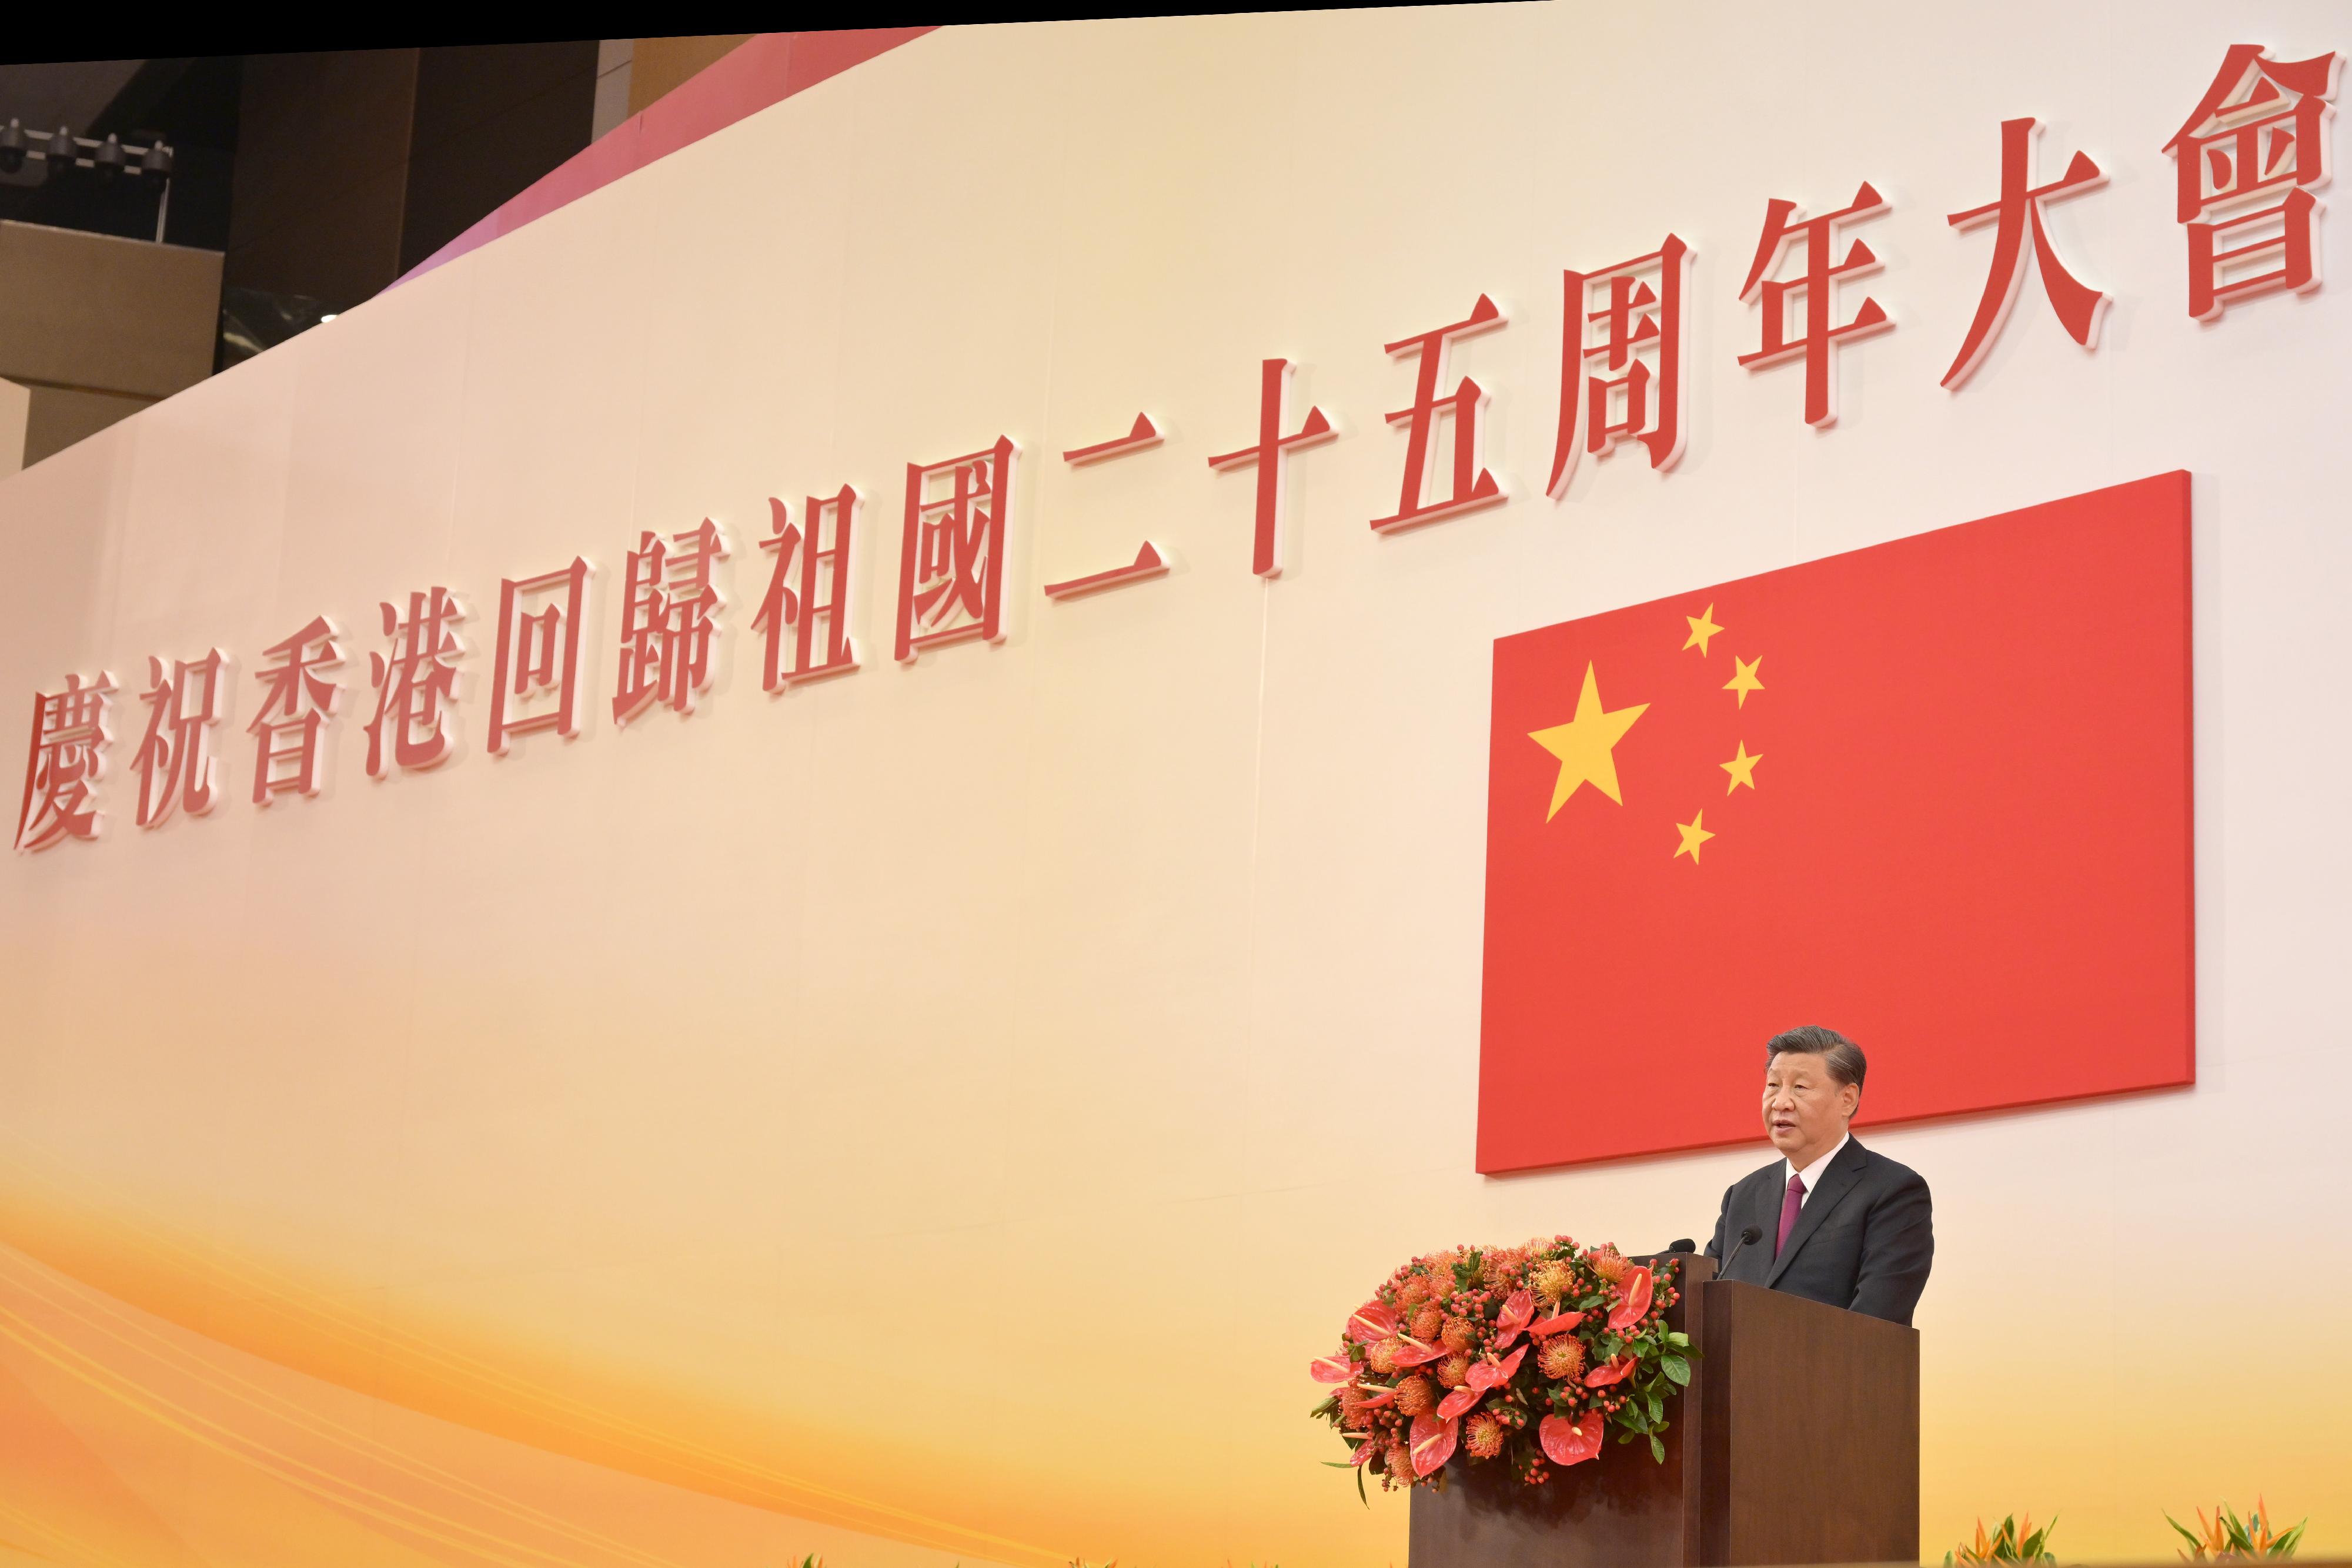 President Xi Jinping speaks at the Inaugural Ceremony of the Sixth-term Government of the Hong Kong Special Administrative Region at the Hong Kong Convention and Exhibition Centre this morning (July 1).